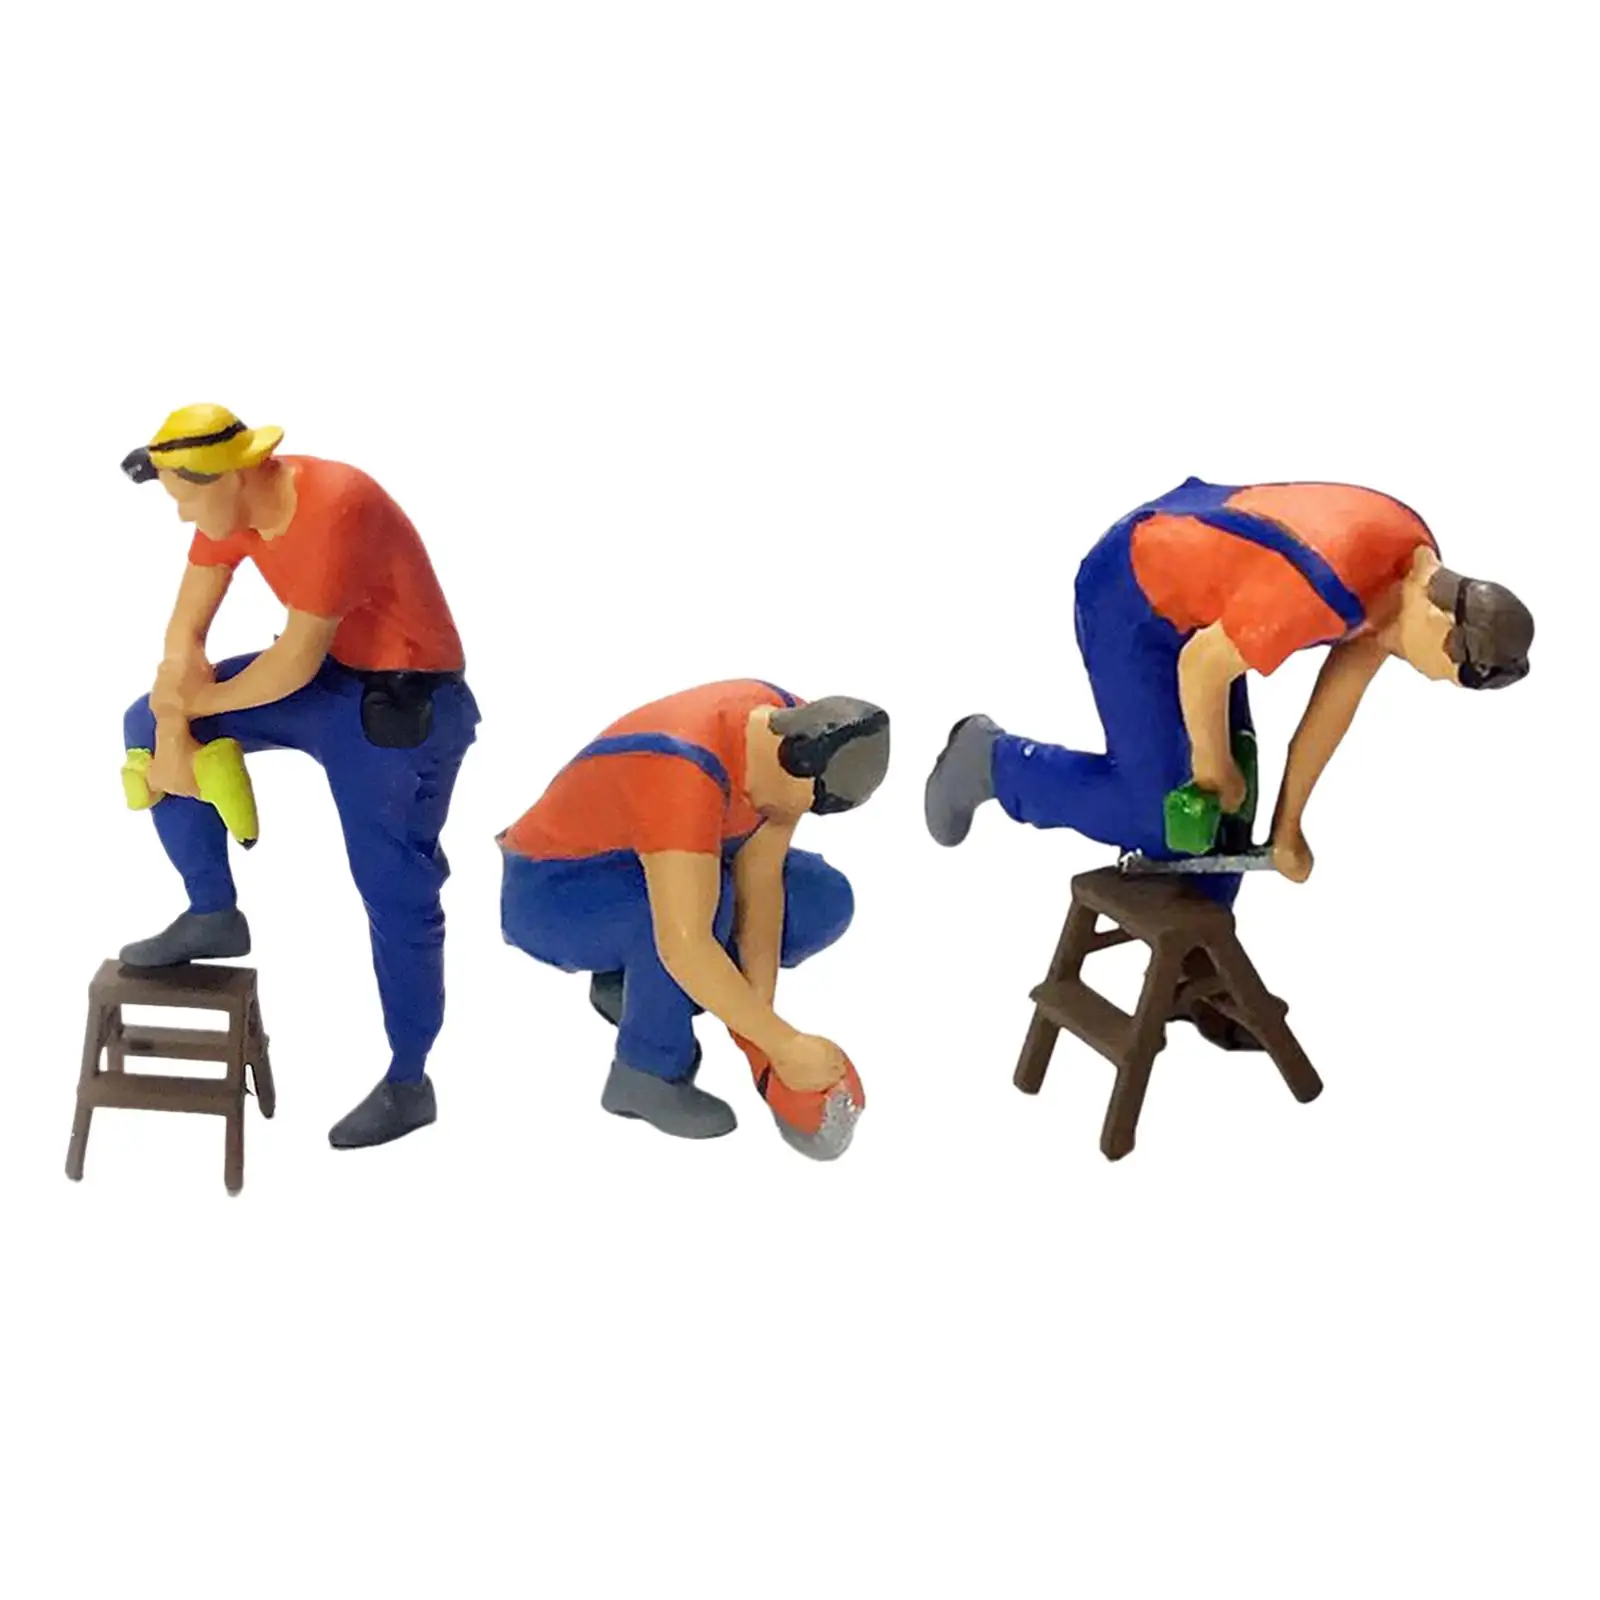 Hand Painted 1/87 People Figure Collectibles Scenery Model Train Scenes Repairman Character